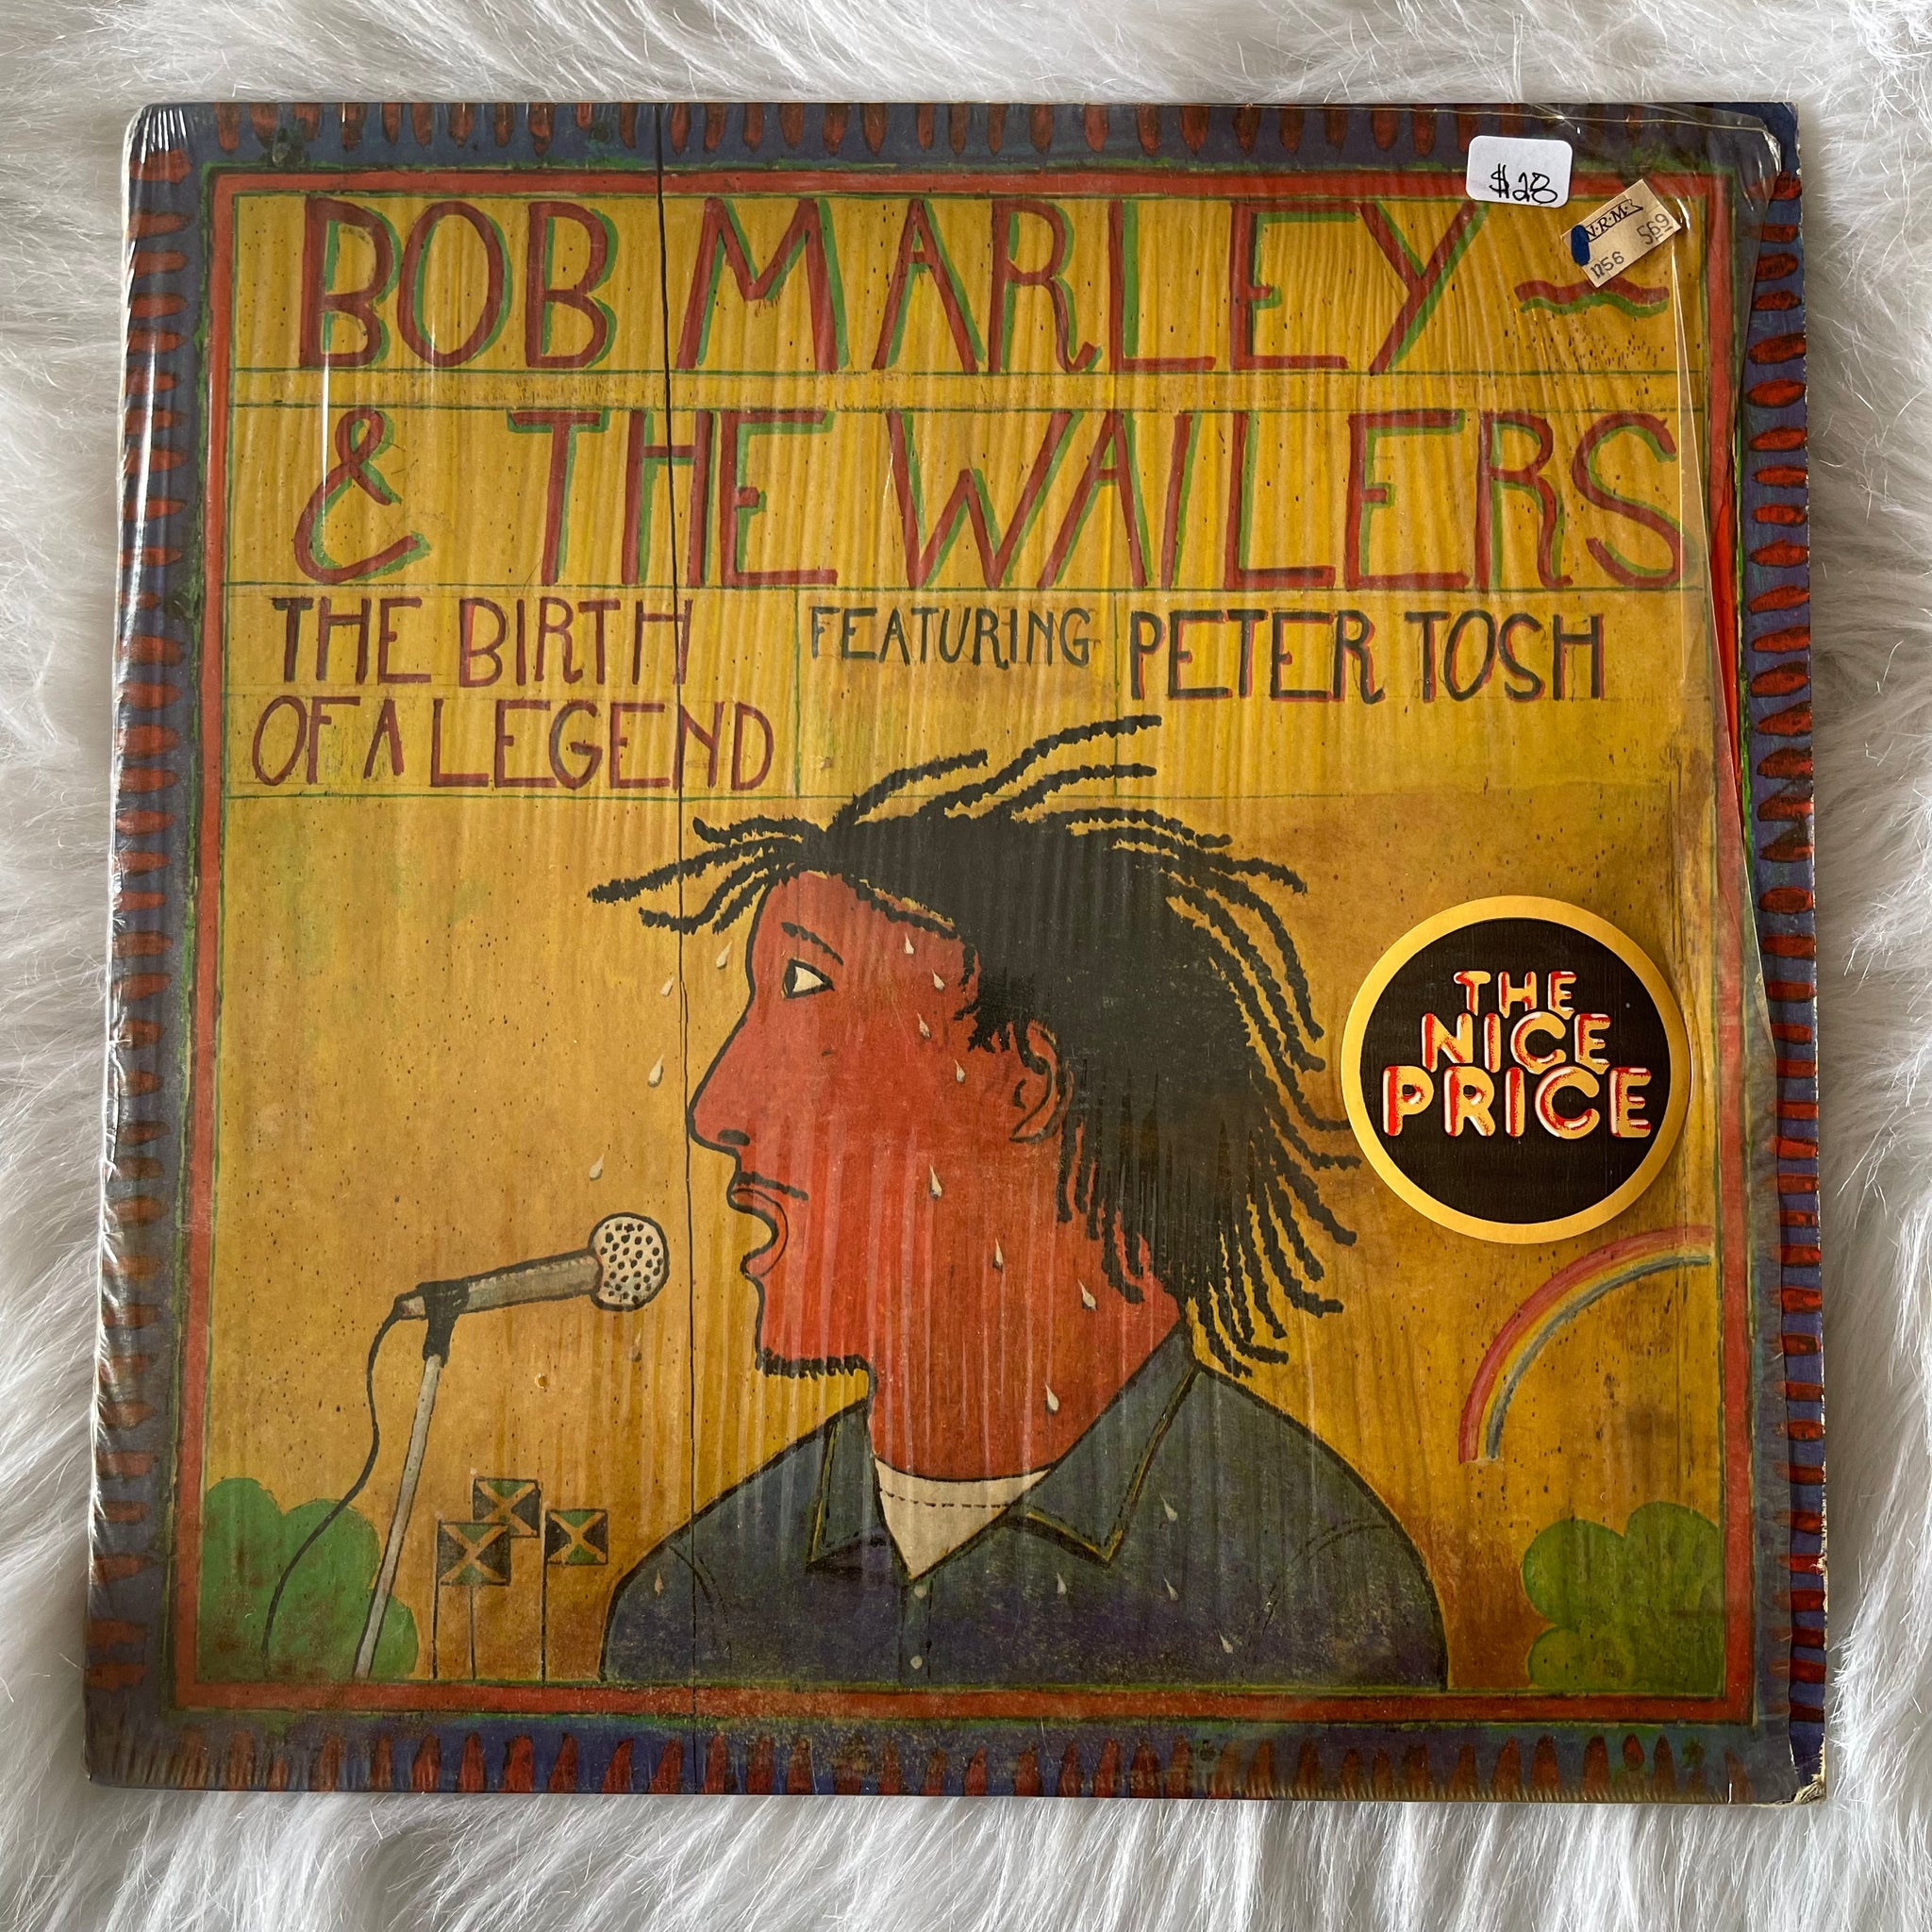 Bob Marley and the Wailers-The Birth of a Legend